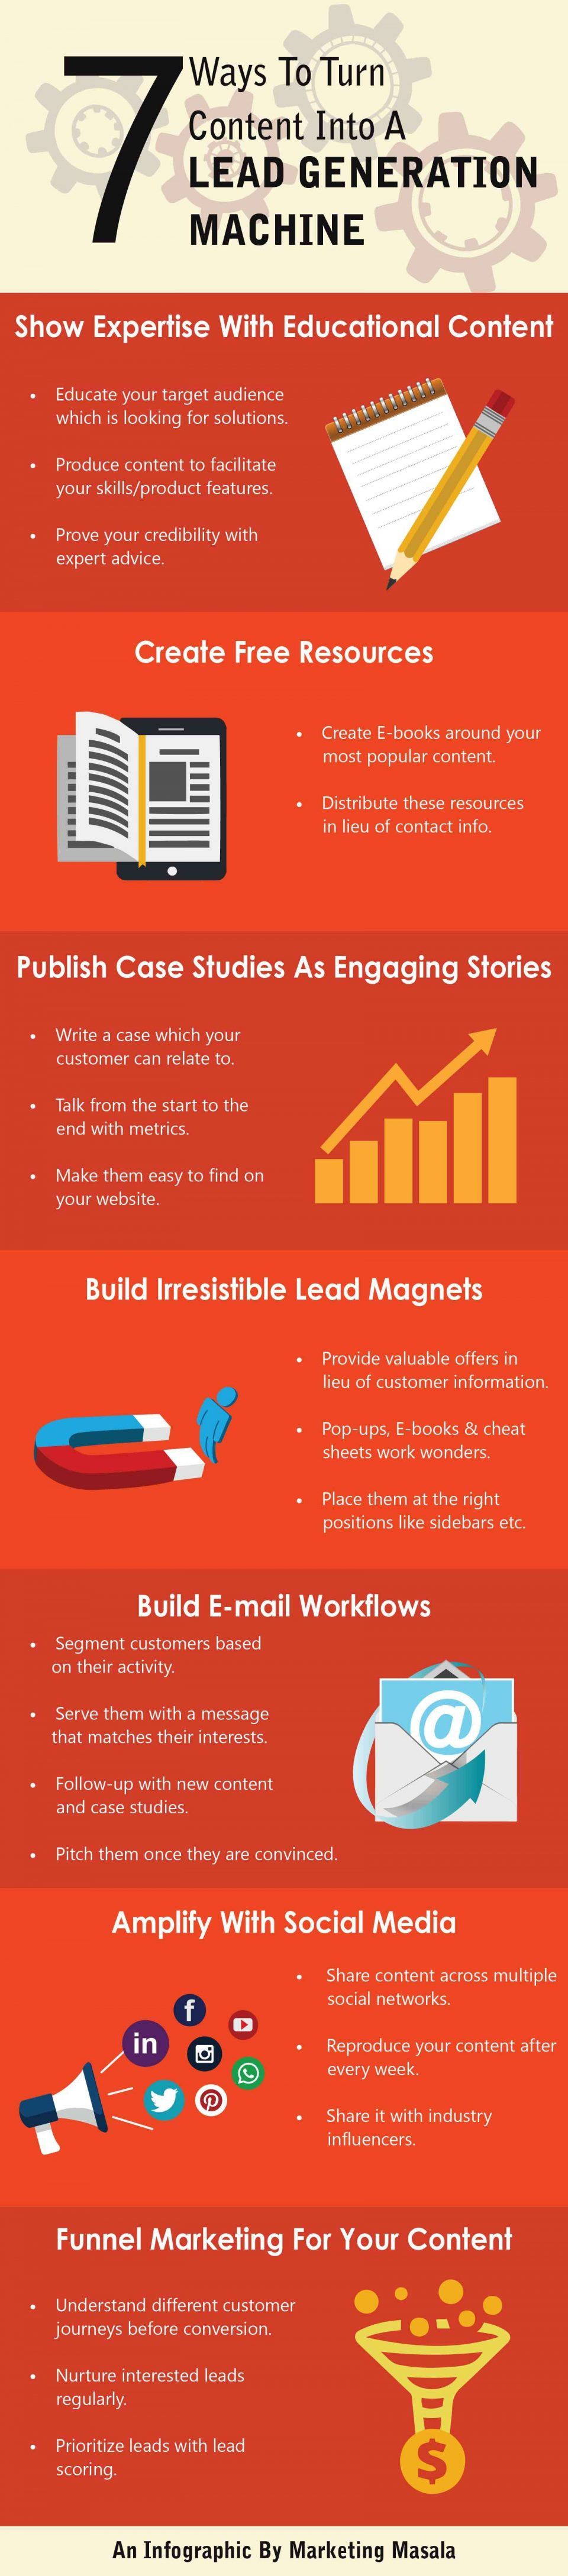 7 Ways To Turn Content Into A Lead Generation Machine Infographic